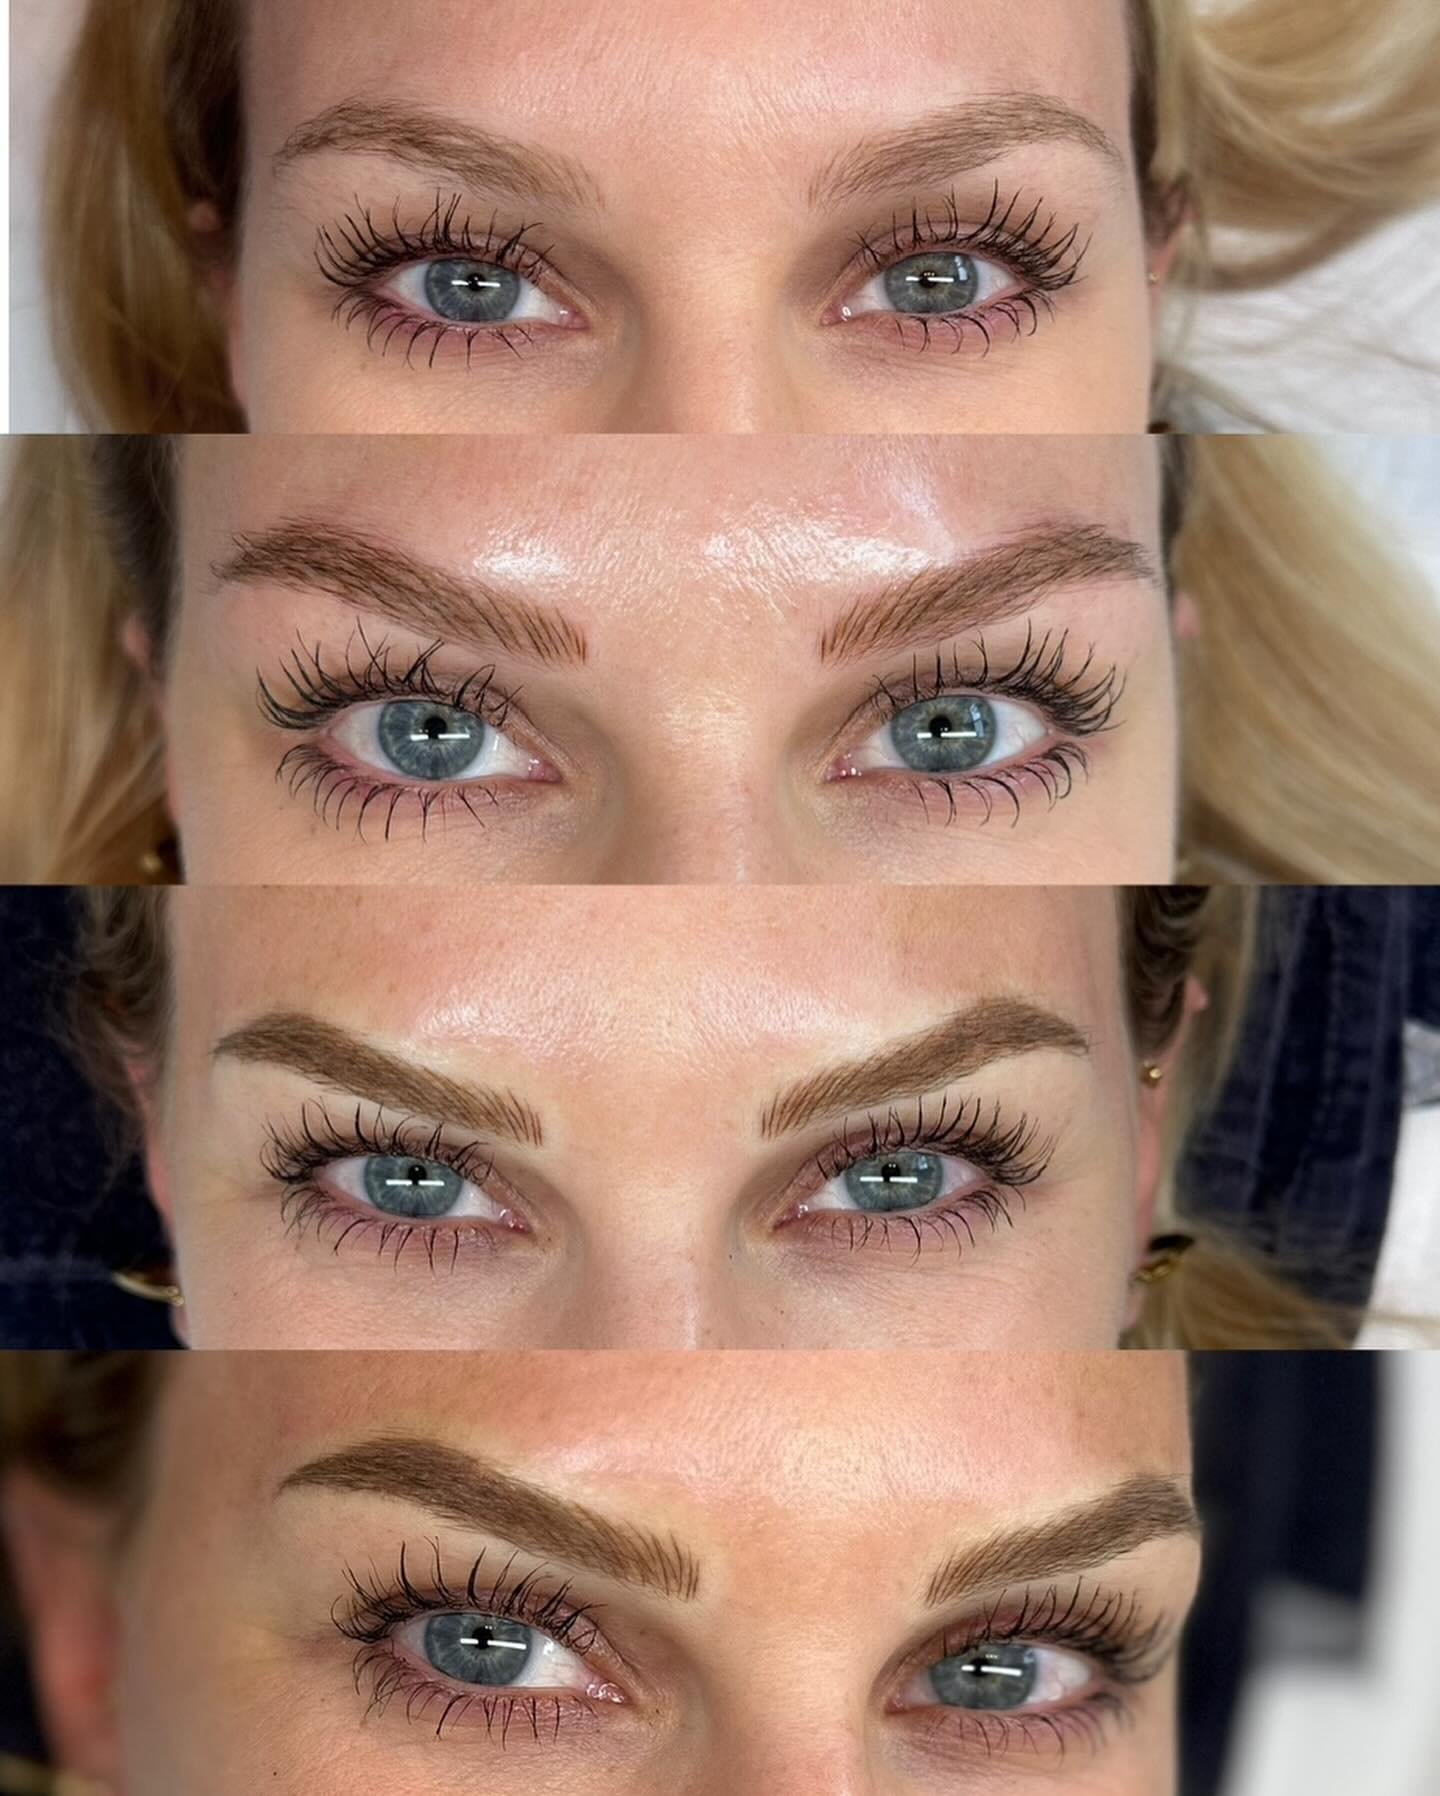 My client originally wanted to air on the side of caution and start with microblading with very little shading on her second session she had grown to trust me and decided a bolder look was more fitting! Final look is #microblading strokes coupled wit